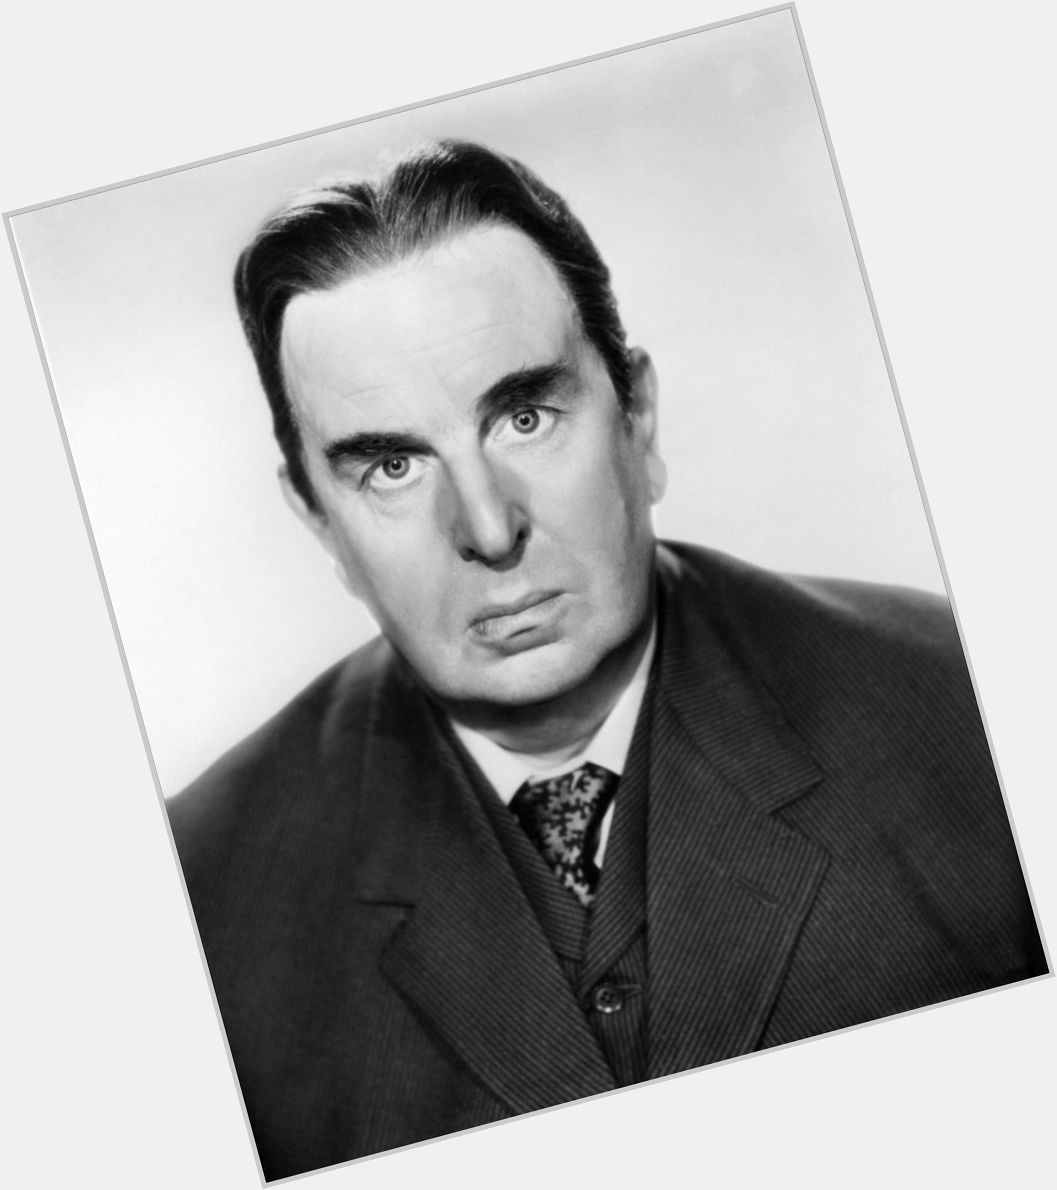 <a href="/hot-men/robert-morley/is-he-where-buried">Robert Morley</a> Large body,  salt and pepper hair & hairstyles